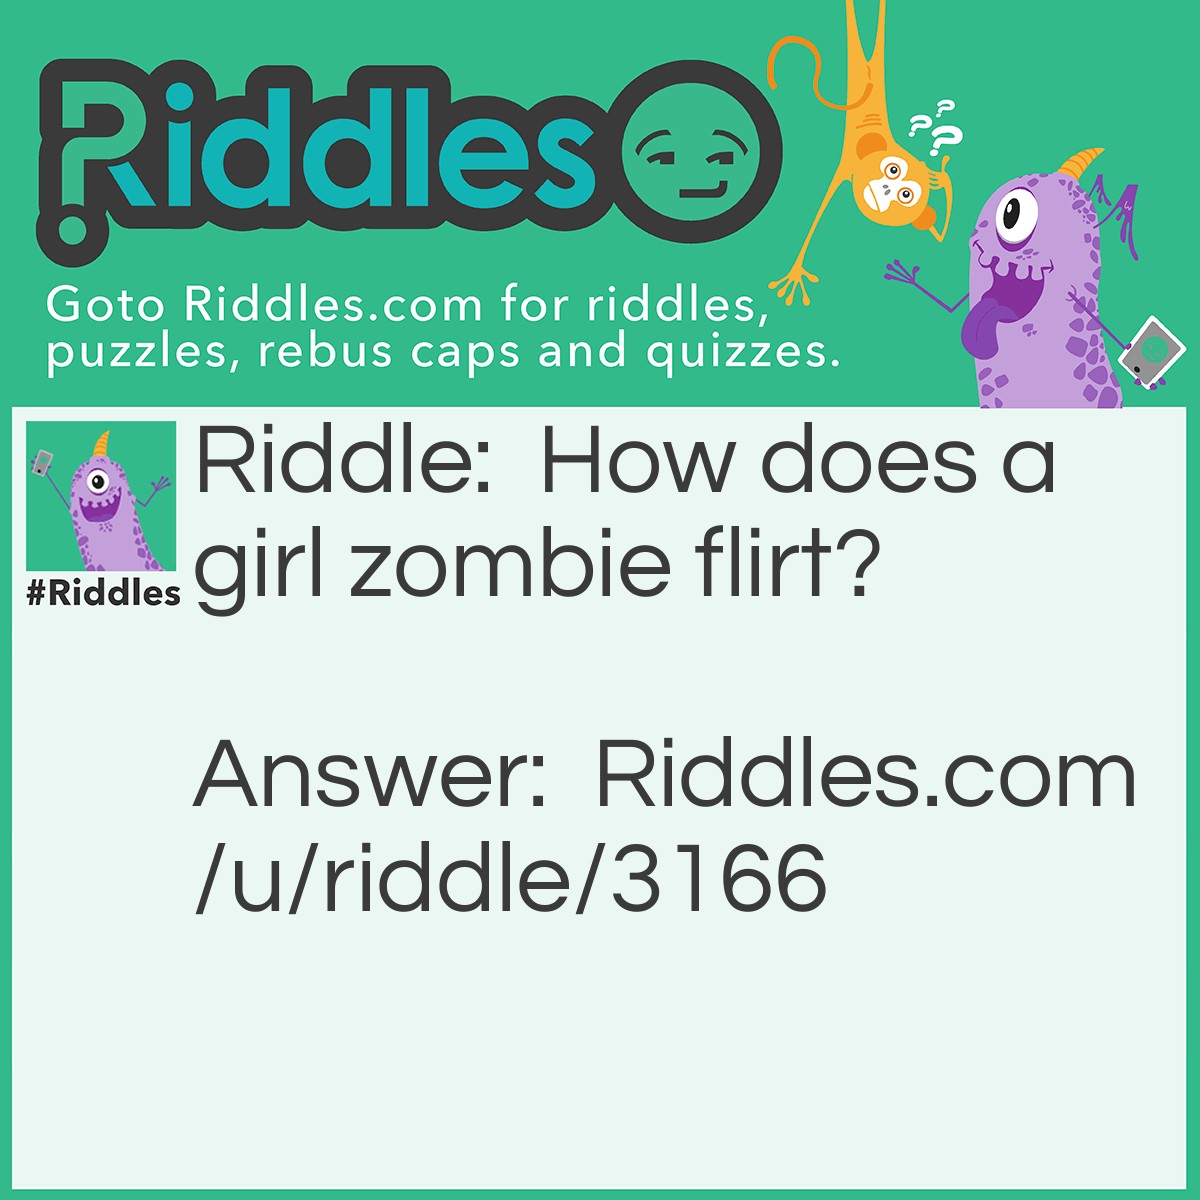 Riddle: How does a girl zombie flirt? Answer: She bats here eyes!